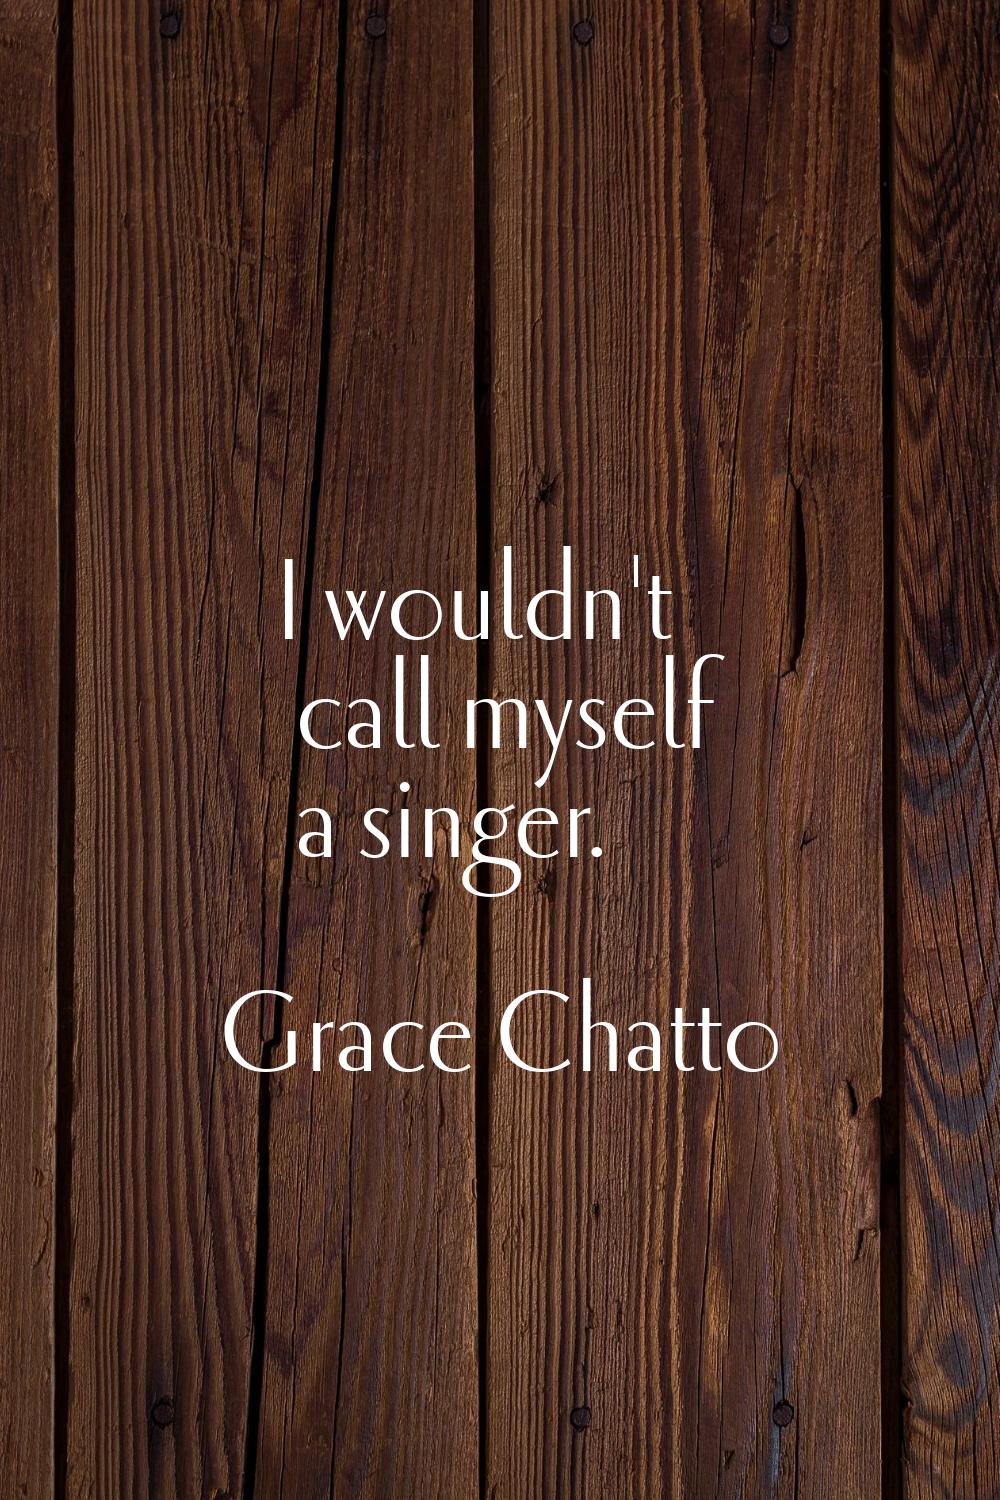 I wouldn't call myself a singer.